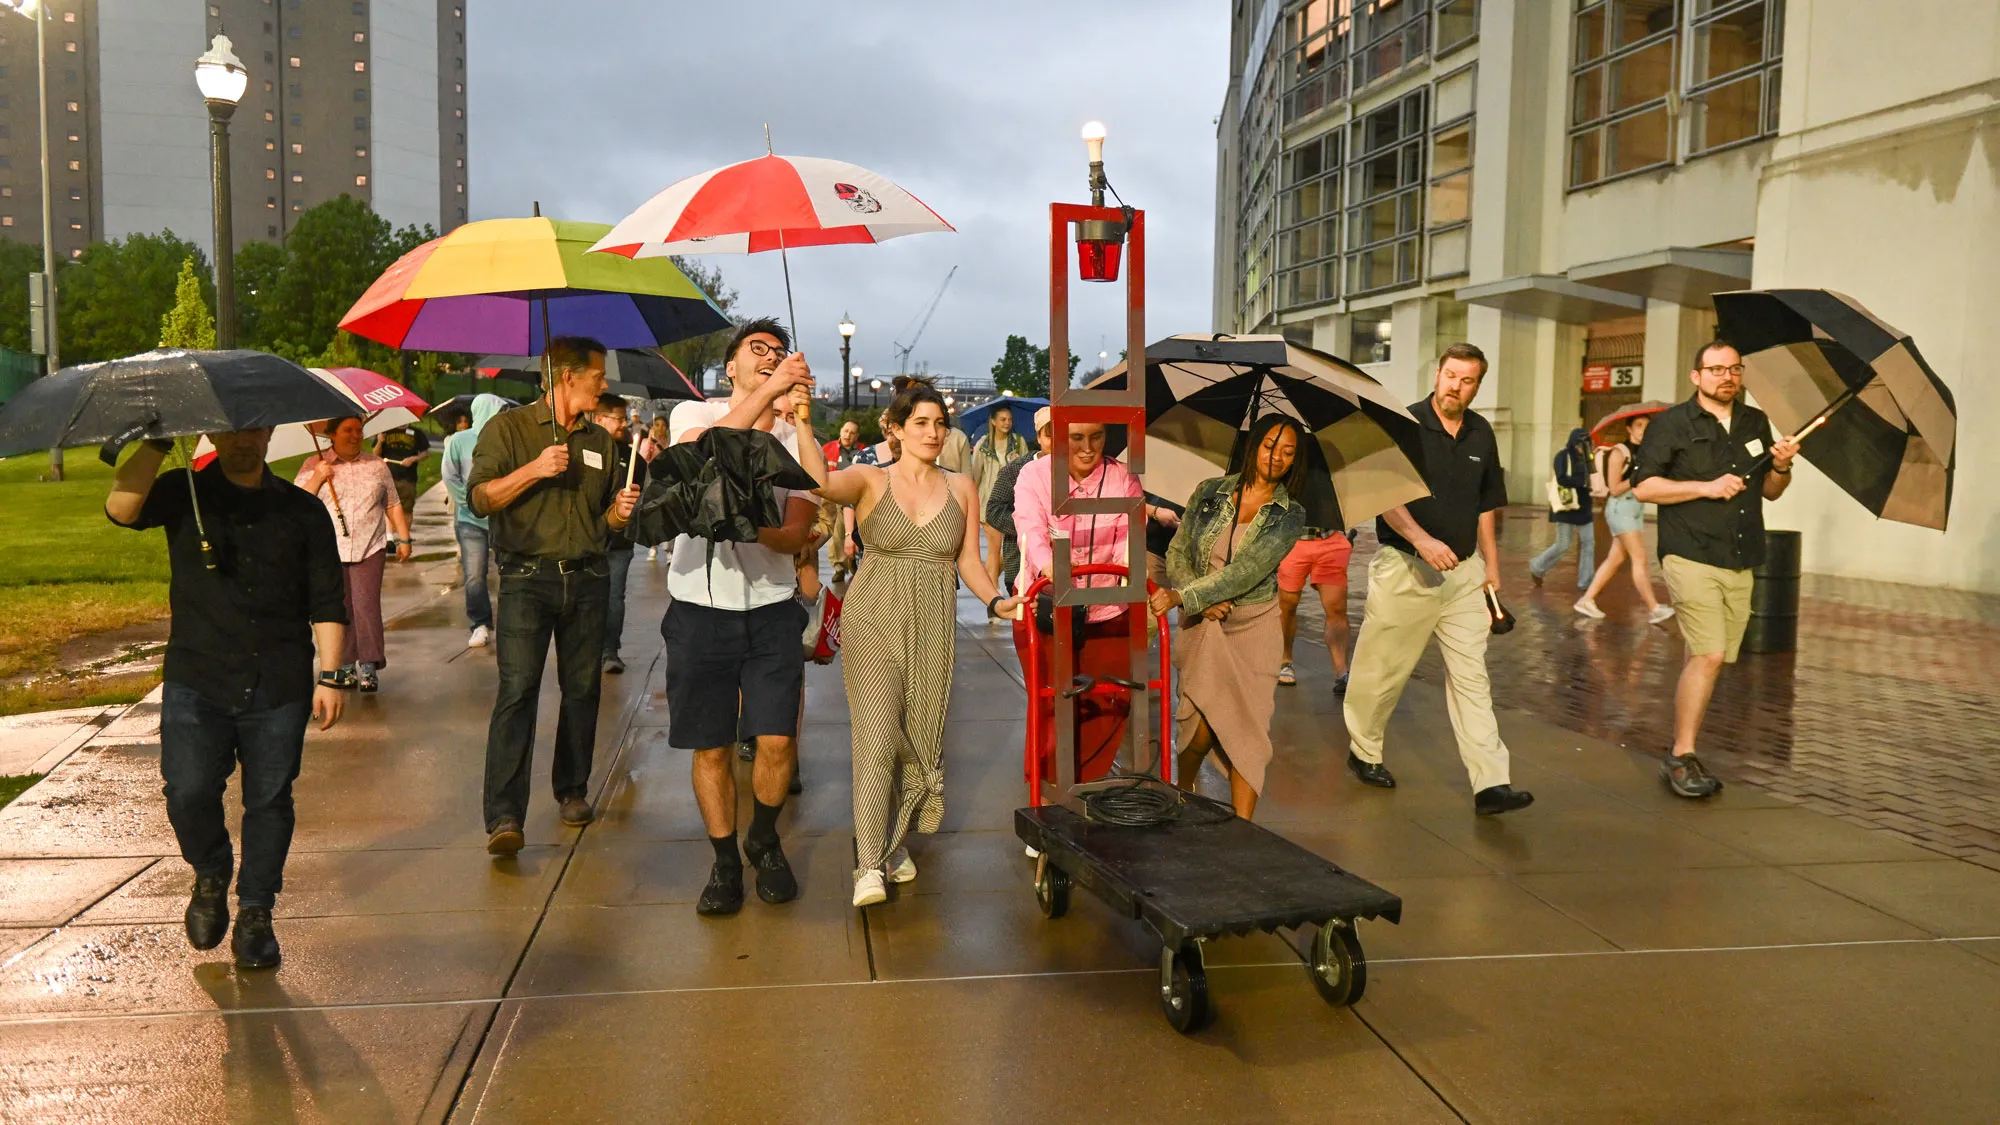 A crowd of teachers and students, many carrying umbrellas, accompany a rolling cart with a large metal OSU sculpture (those letters are stacked on top of each other) with a light bulb at top — a ghost light. As it rains, the people pass by university buildings in an informal parade.